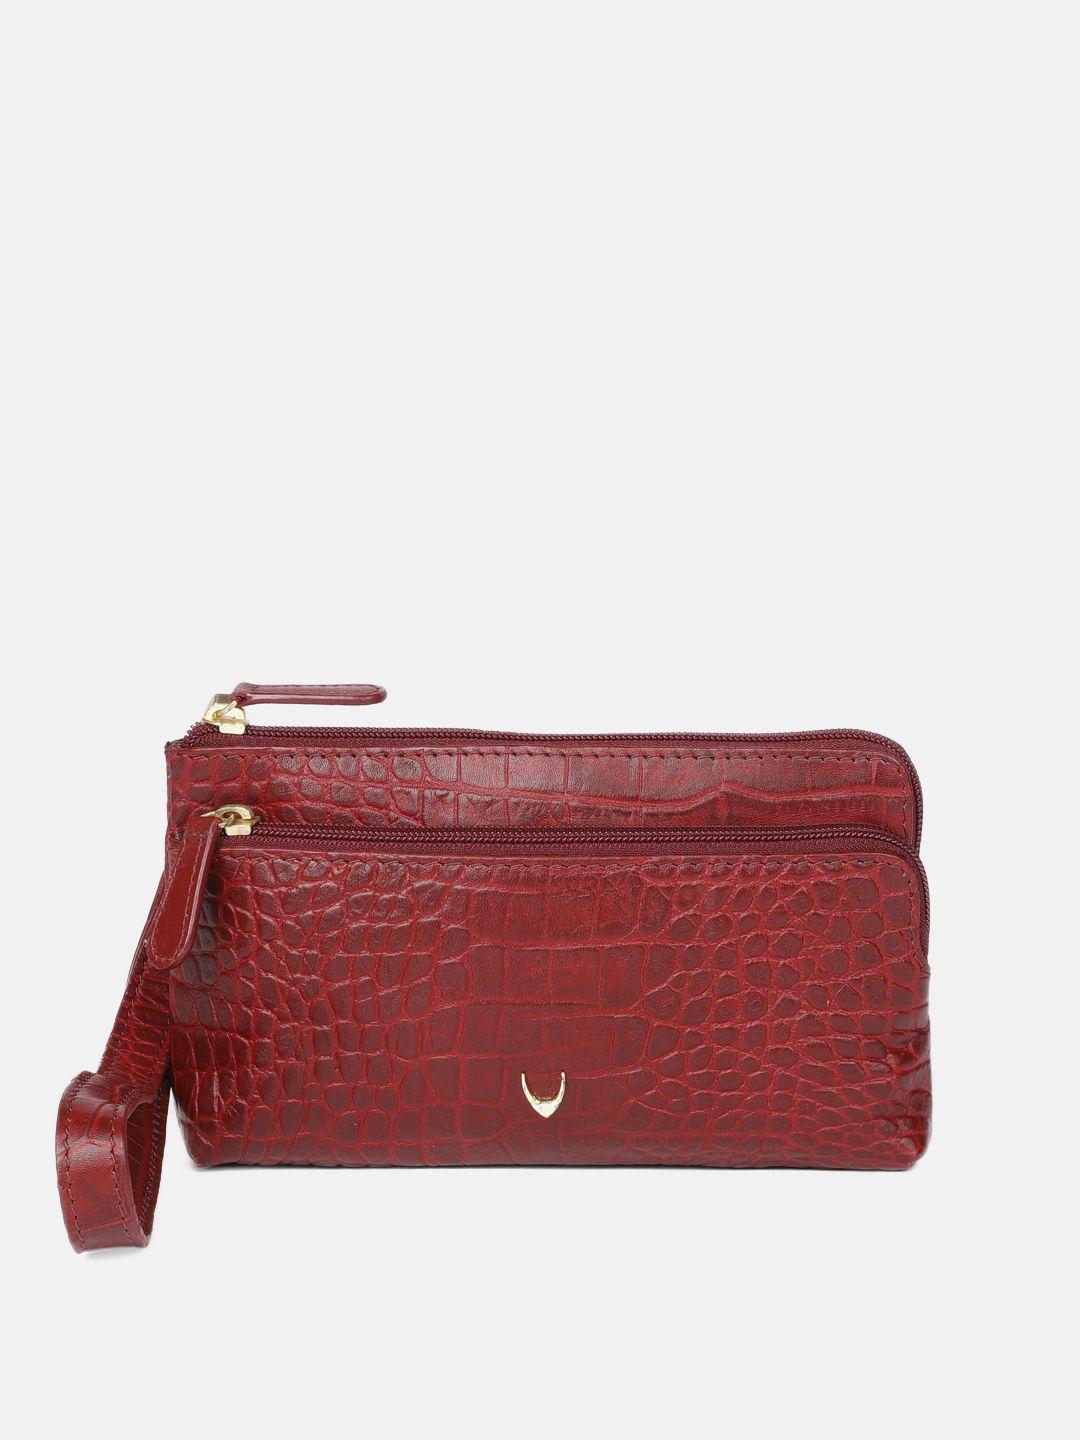 hidesign-red-textured-leather-purse